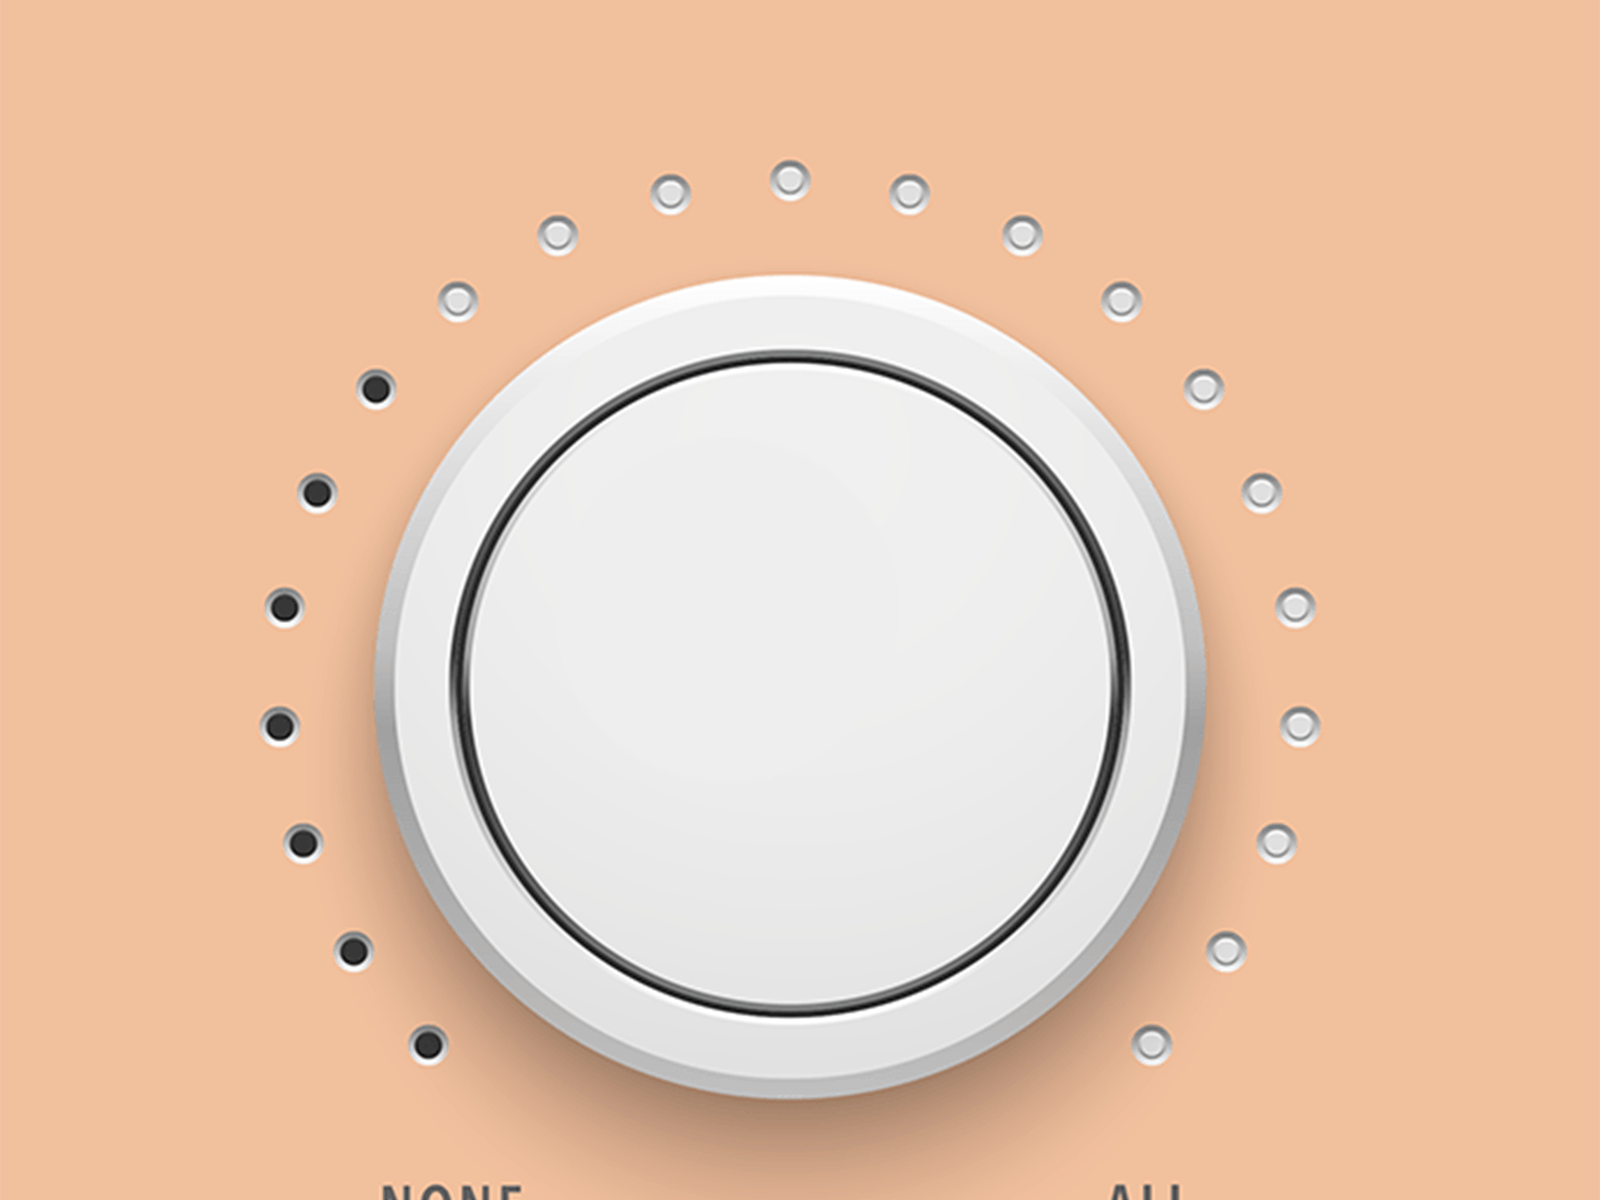 A dial going from 'NONE' to 'ALL'